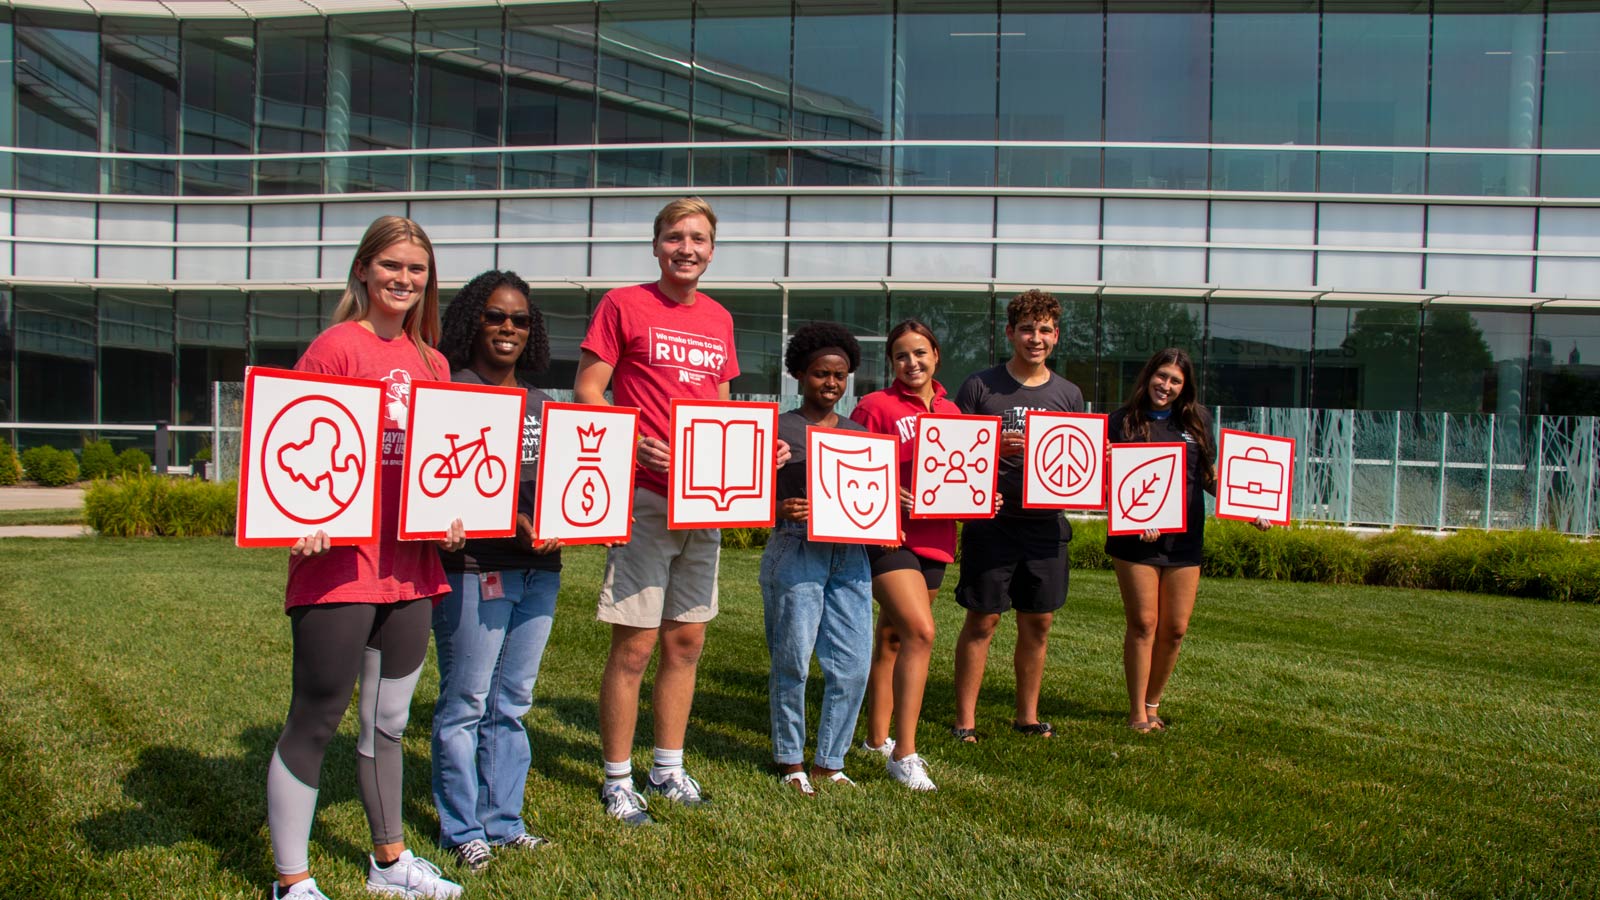 Students hold dimensions of well-being icons